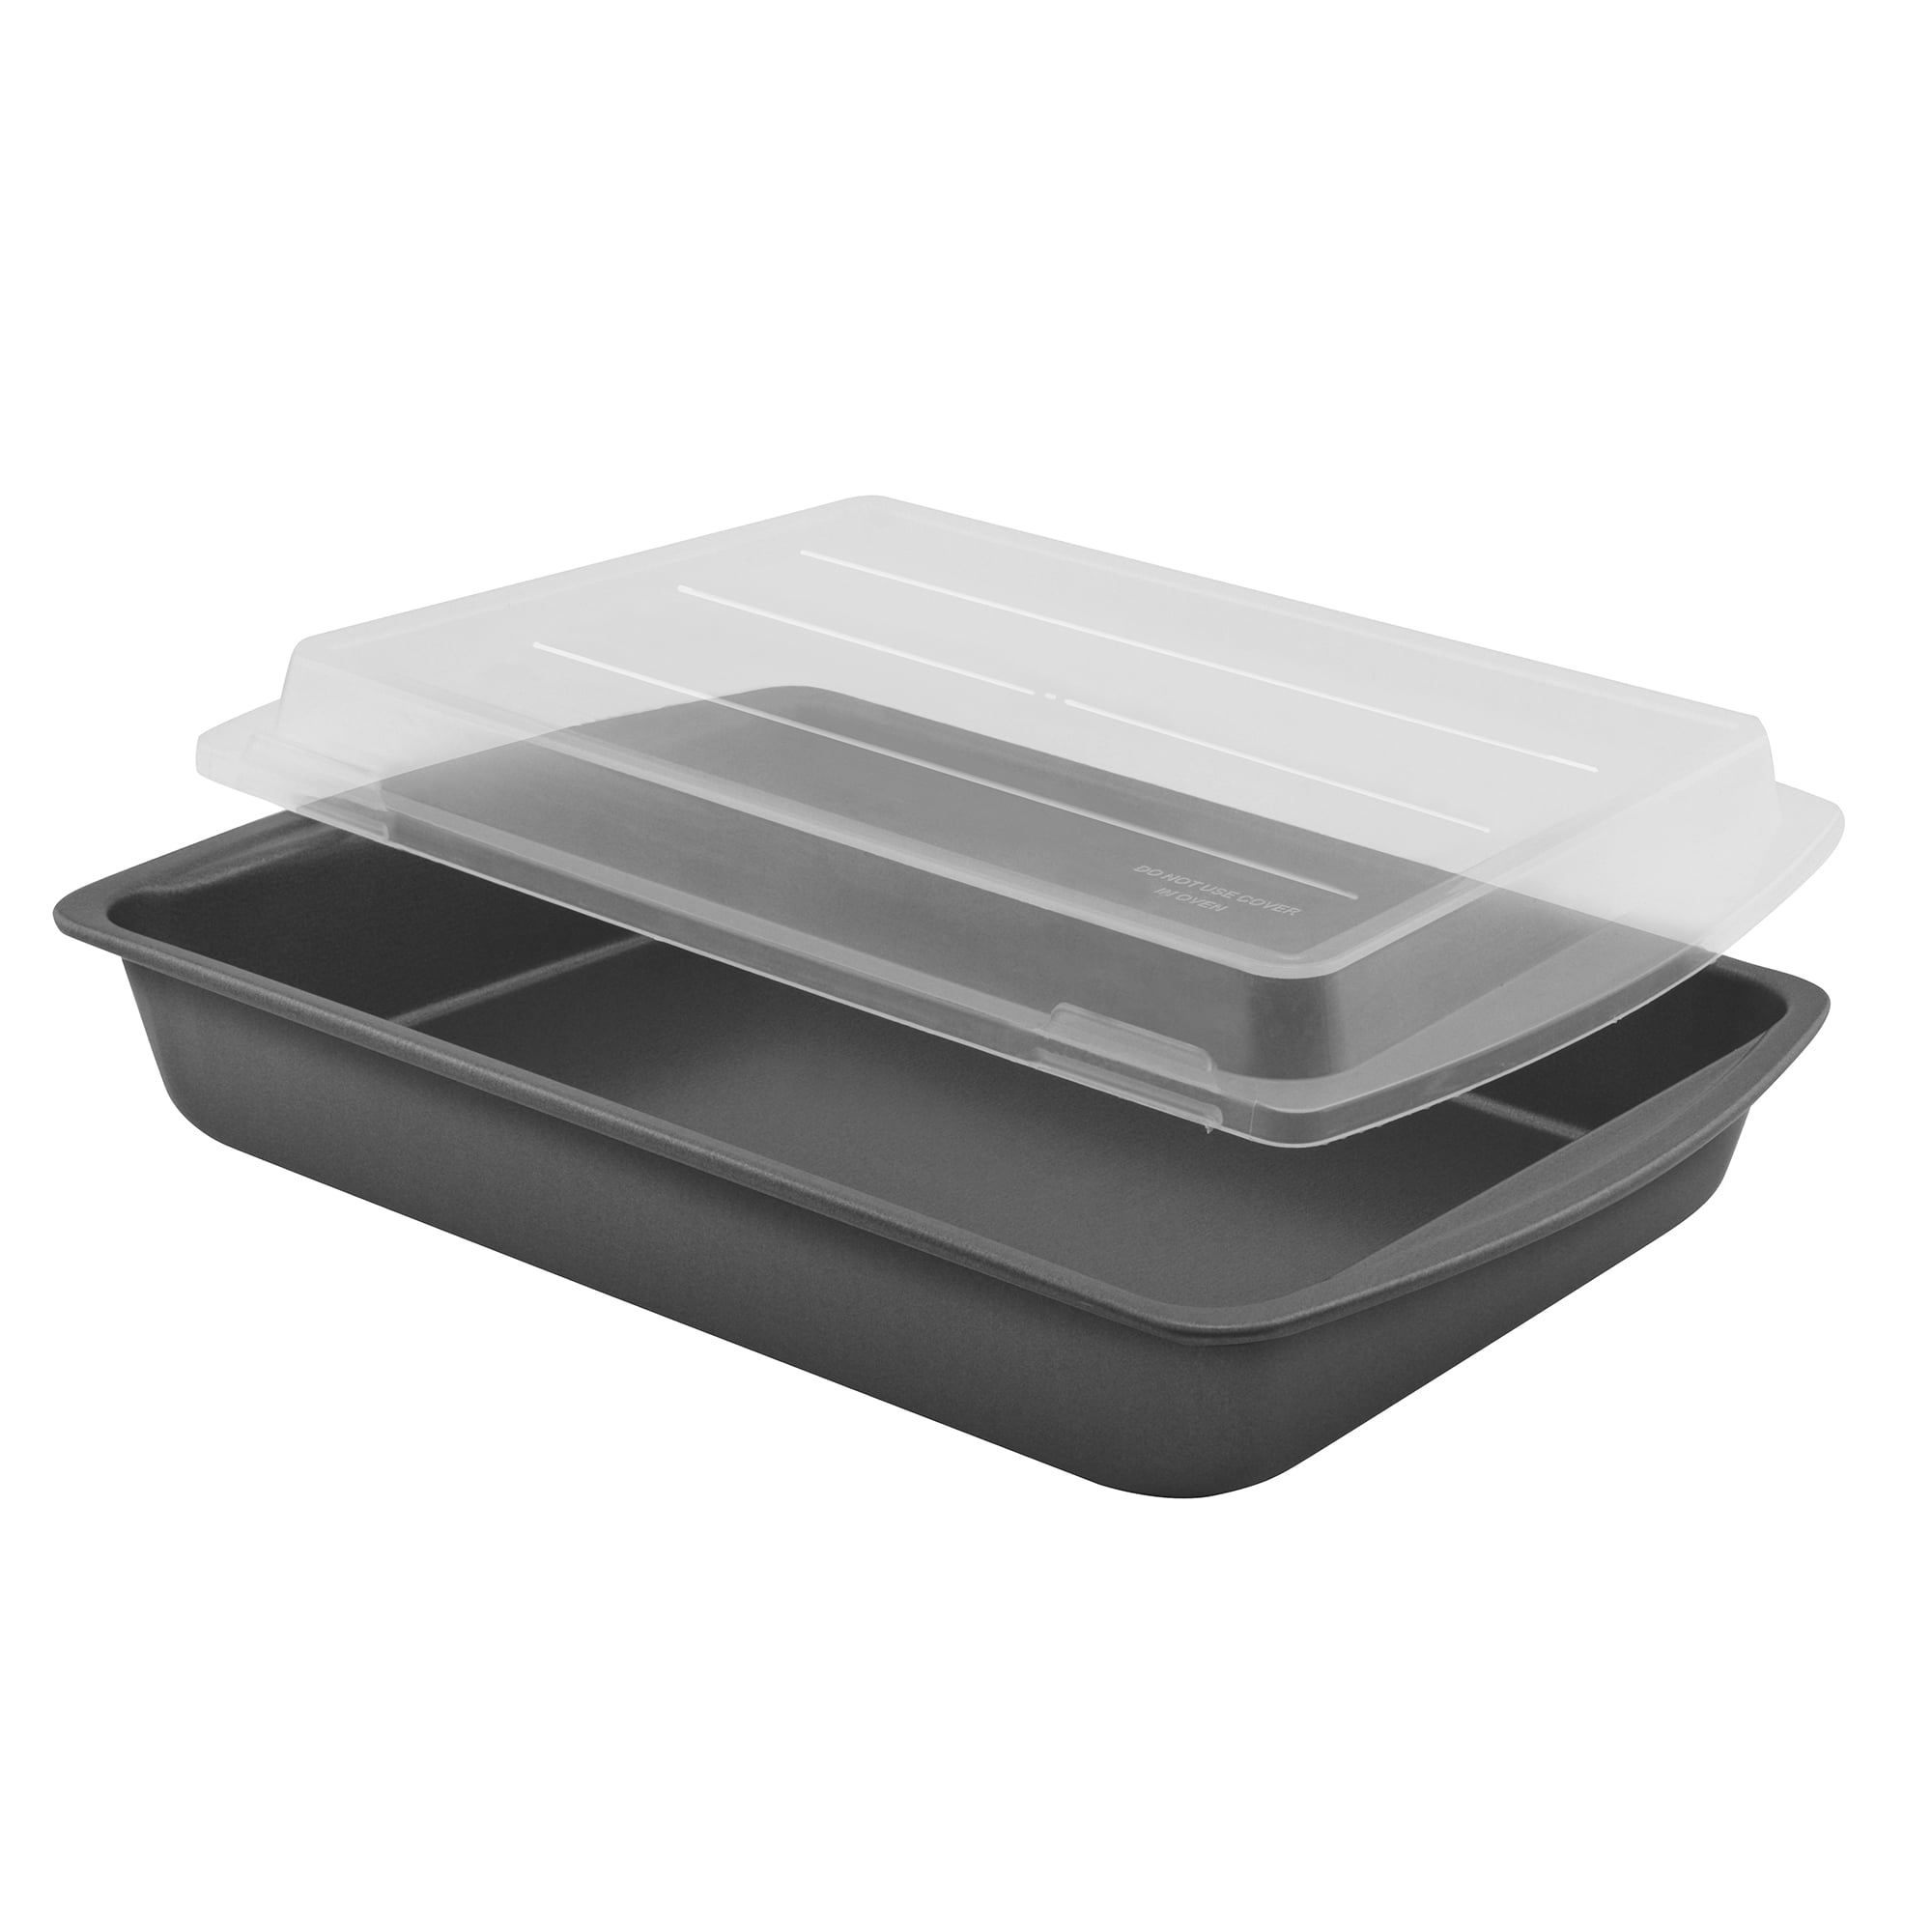 9 Inch x 13 Inch Pan and Lid Set - King Arthur Baking Company